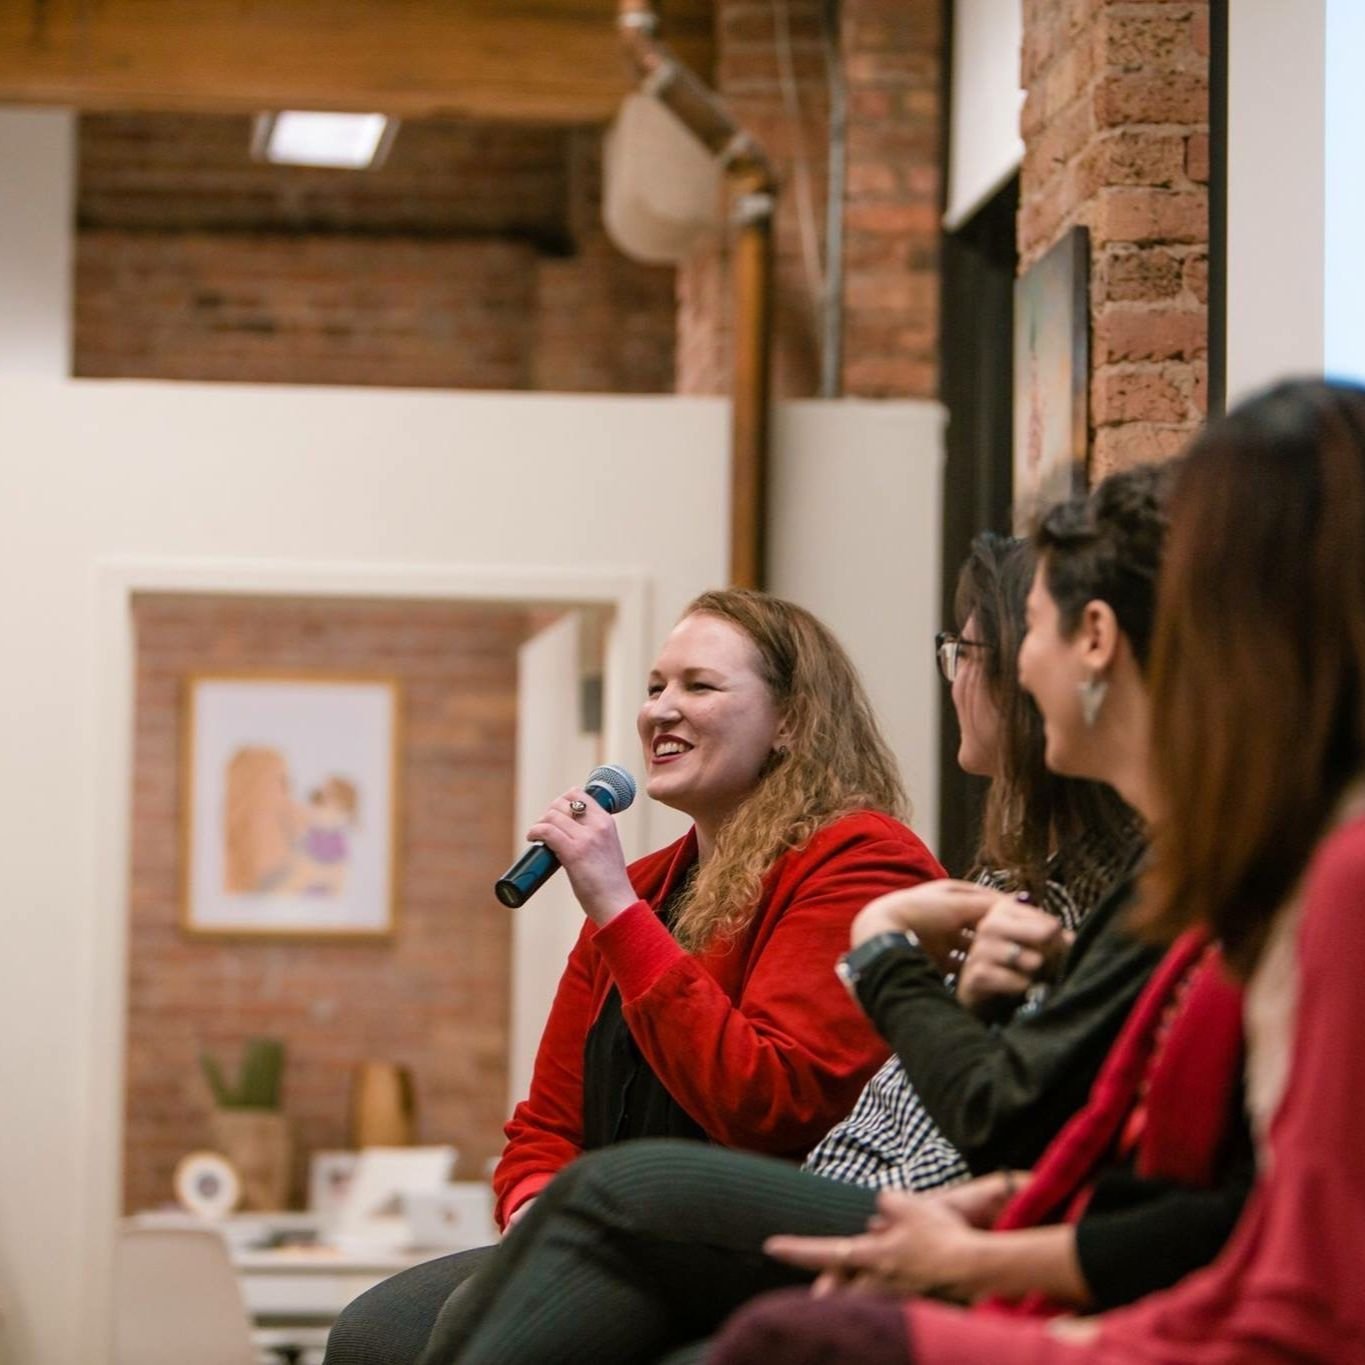 Did you miss Lauren's panel last time? Are you still freaking out about how your social media is going to change your business this year?

Thanks to the City of Chicago, Lauren will be hosting a webinar to discuss creating a social media strategy tha